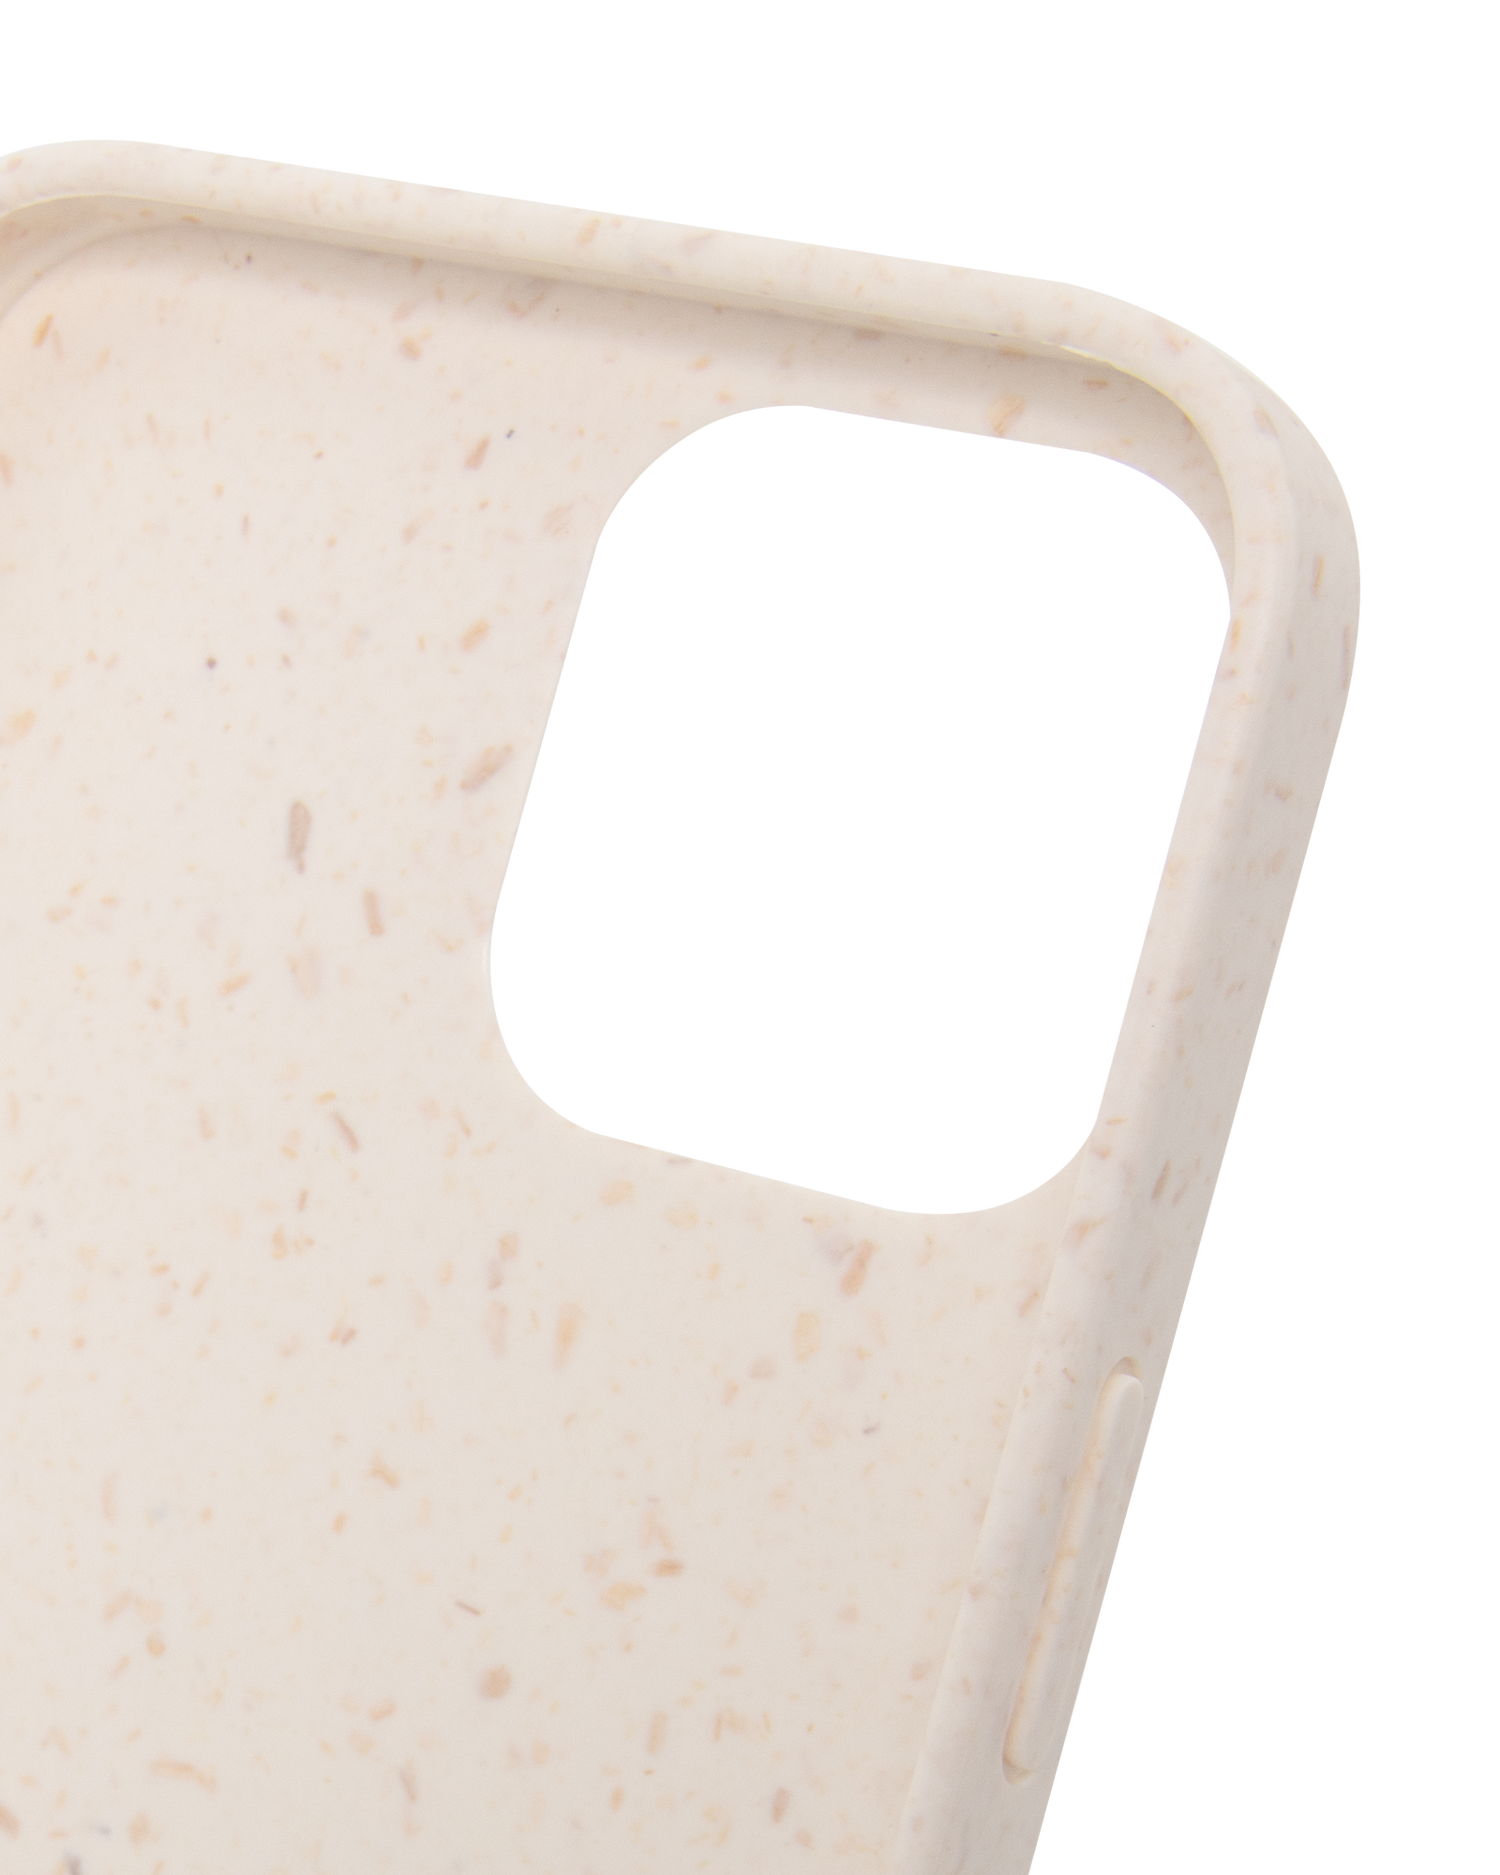 White Eco-Friendly Phone Case for Apple iPhone 12 Pro Max: Details inside